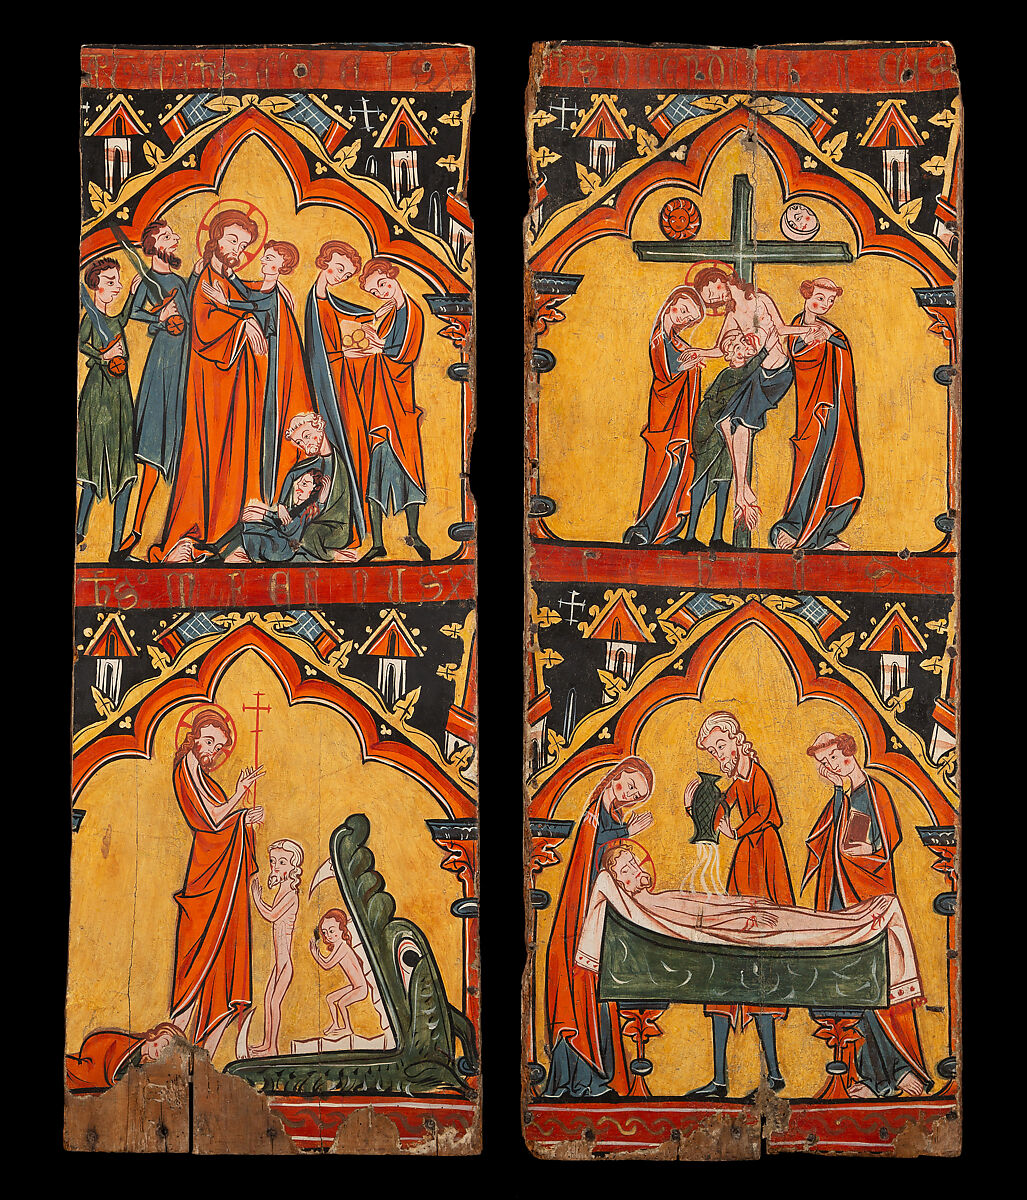 Scenes from the Life of Christ: Arrest of Christ, Christ in Limbo; Descent from the Cross, Preparation of Christ’s Body for His Entombment, Tempera on wood, Spanish 